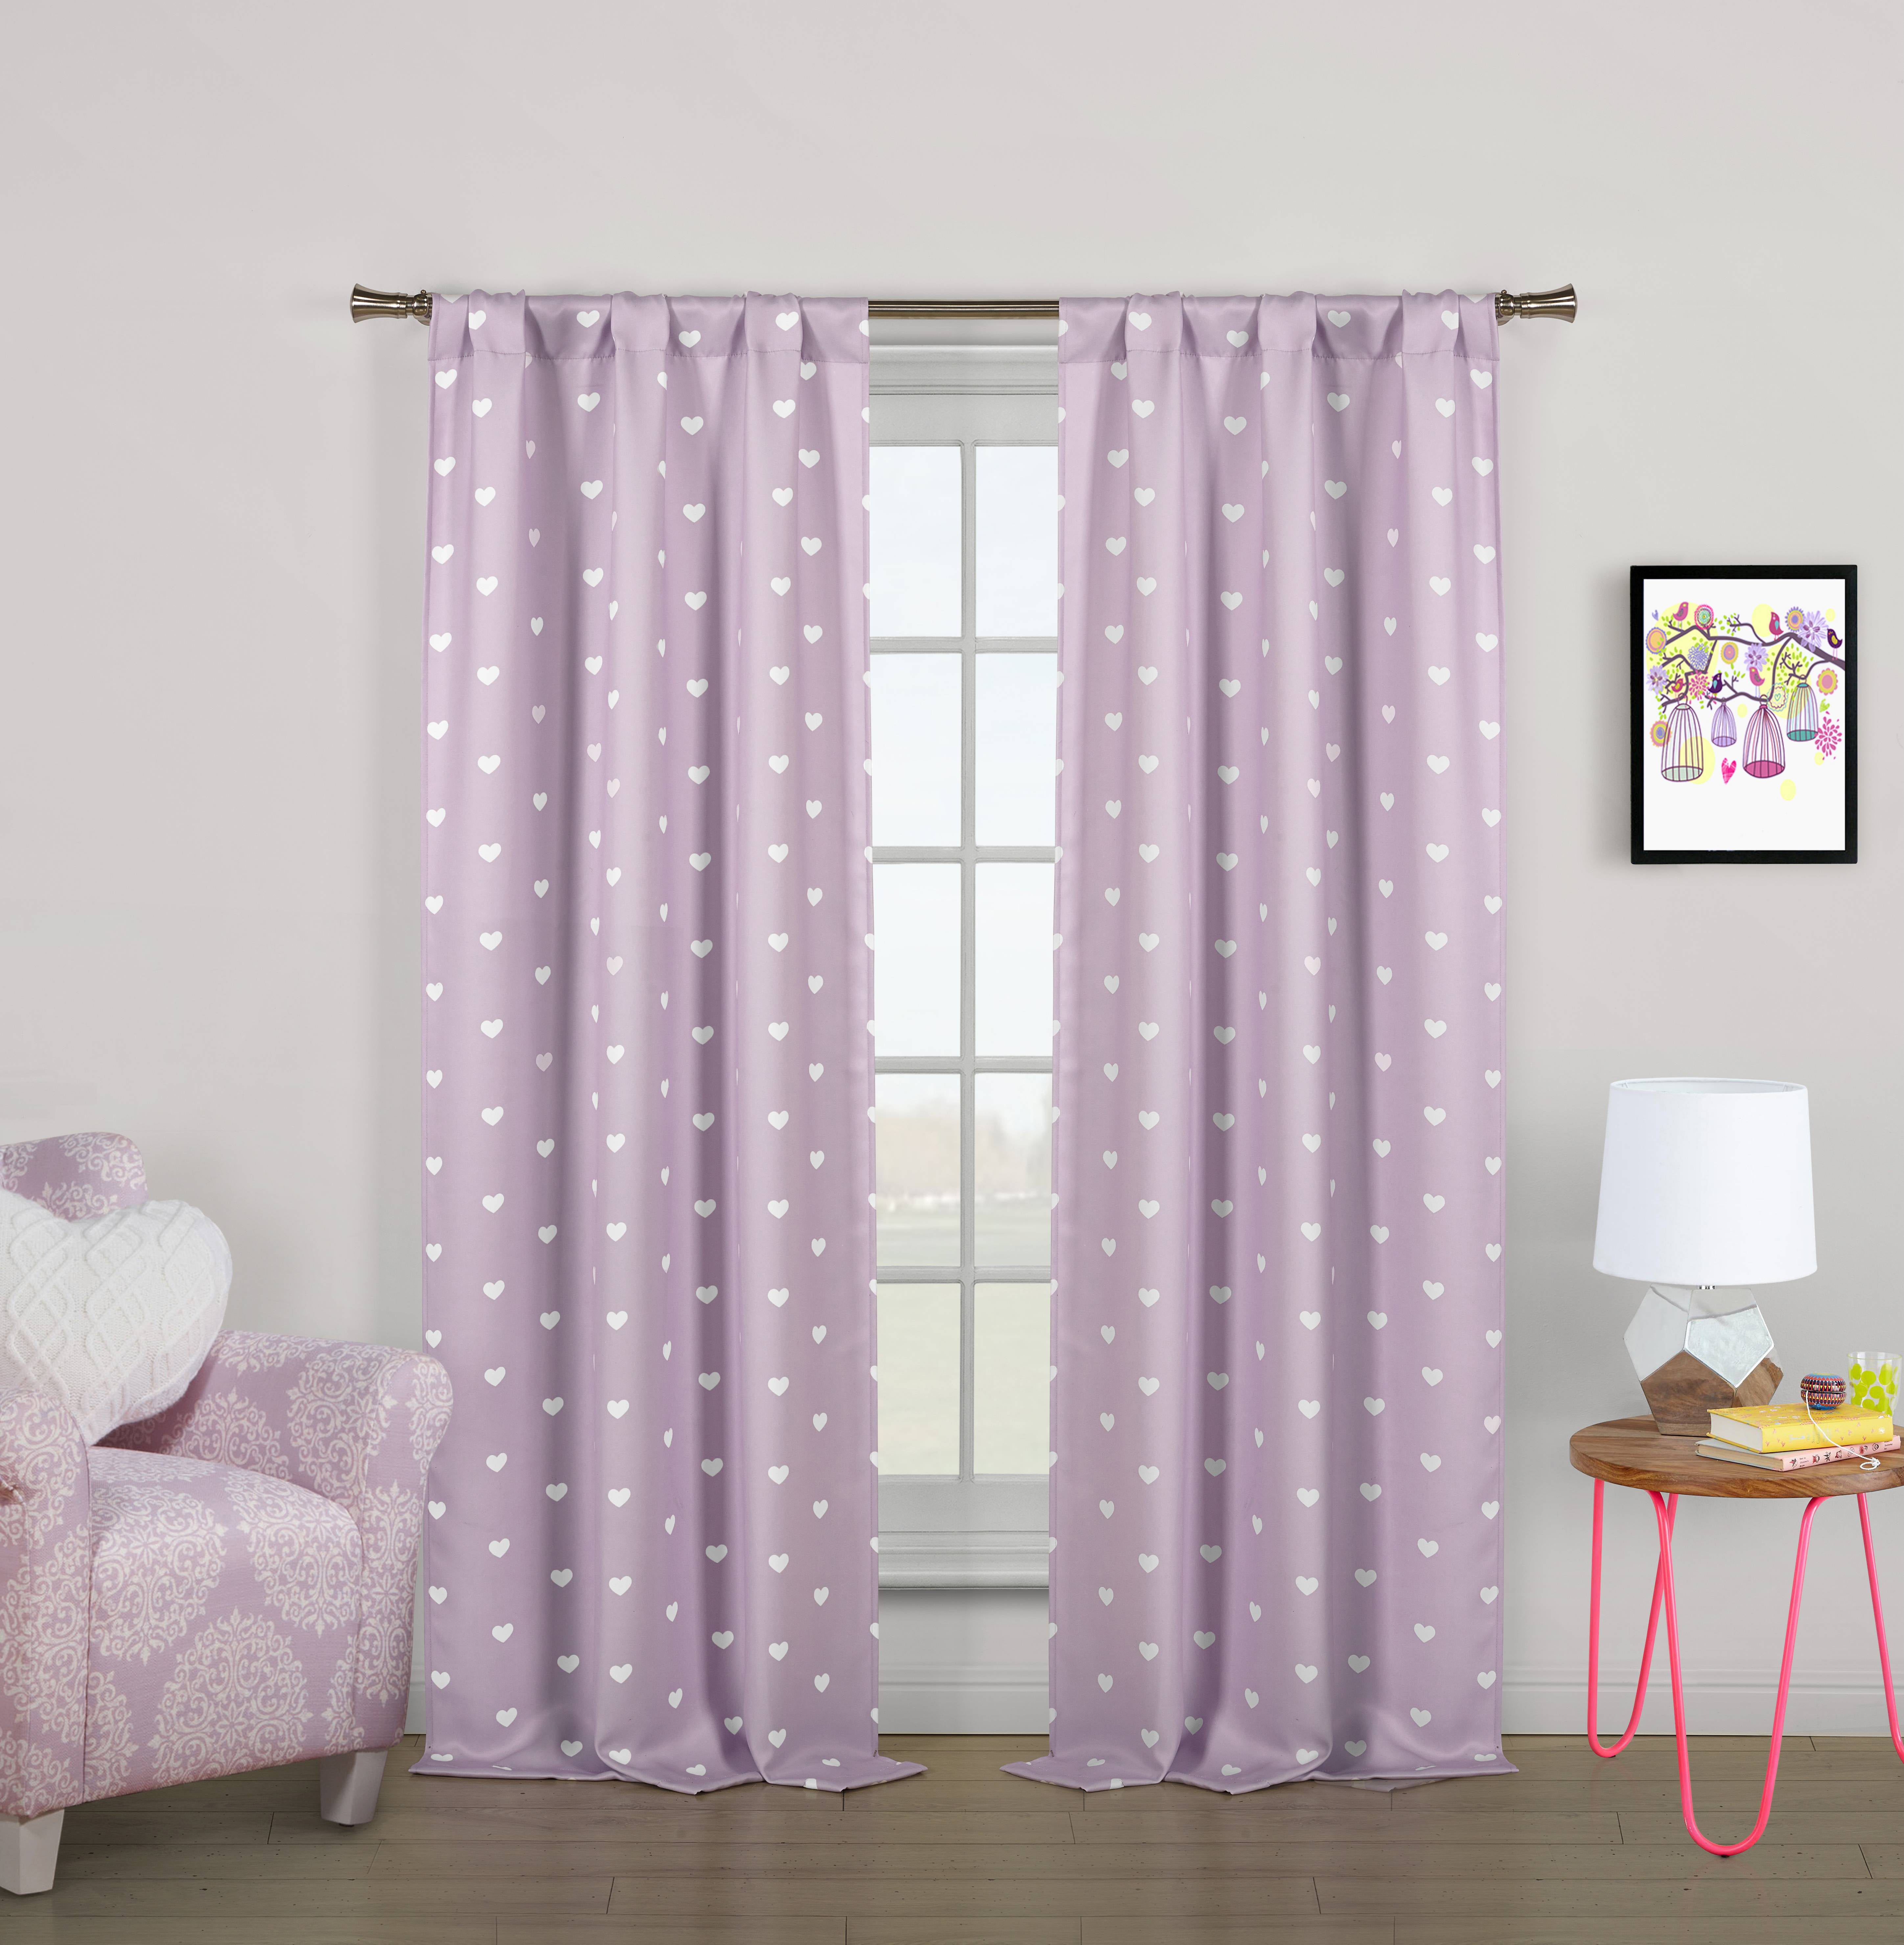 Anjee Eyelet Blackout Thermal Insulated Curtains 2 Panels 46 x 54 inch for Living Room/Bedroom/Nursery with 2 Matching Tie Backs Beige 